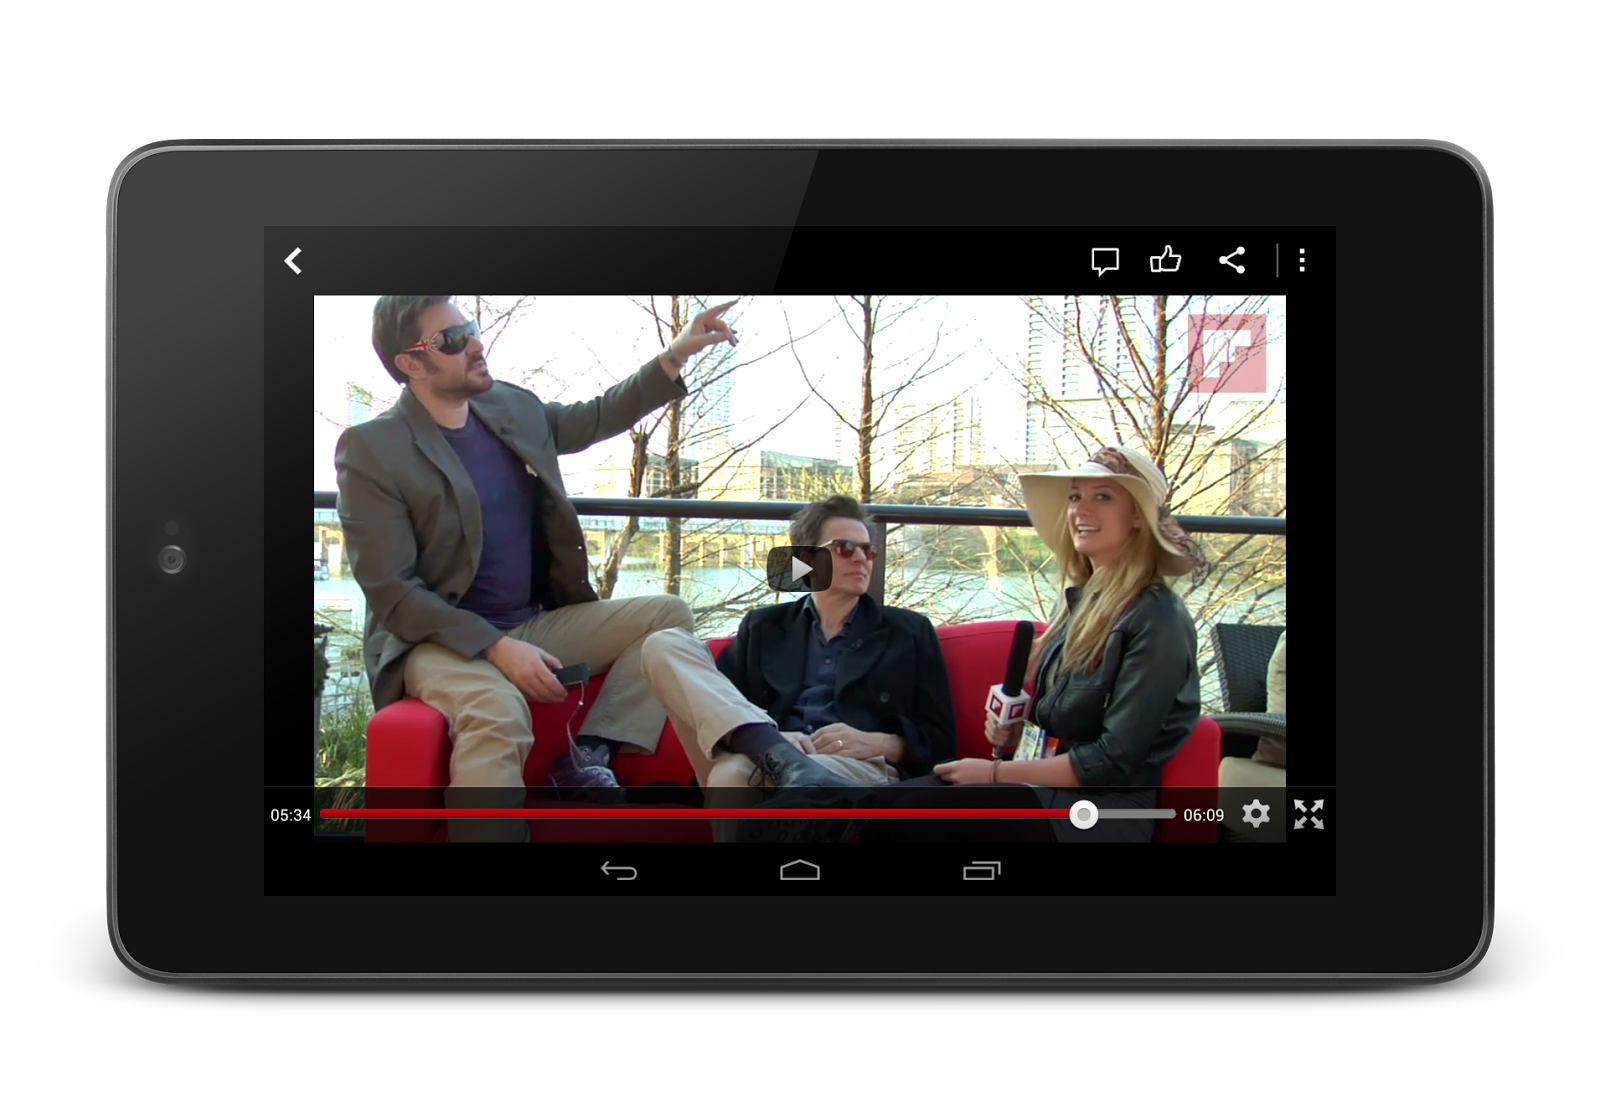 No WebView required, with native YouTube Player API for Android